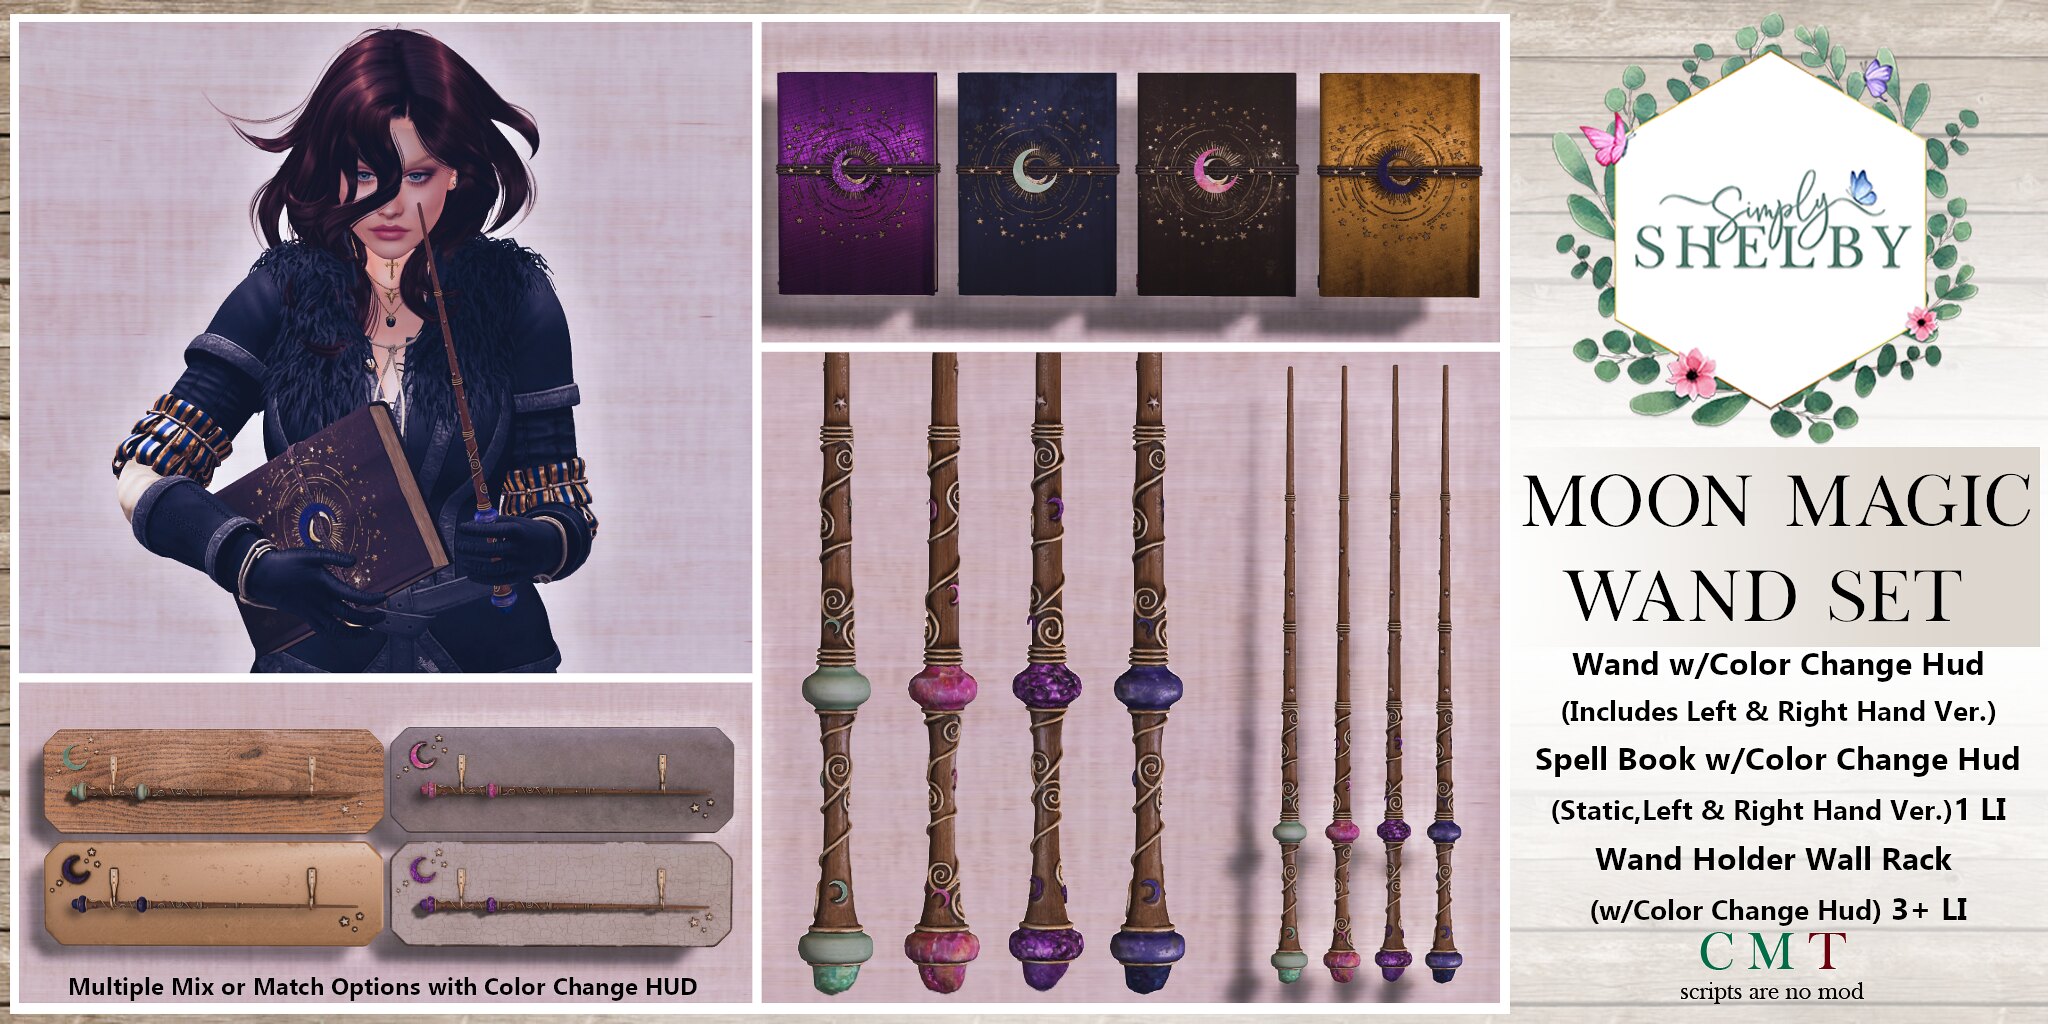 Simply Shelby – Moon Magic Wand & Spellbook Set